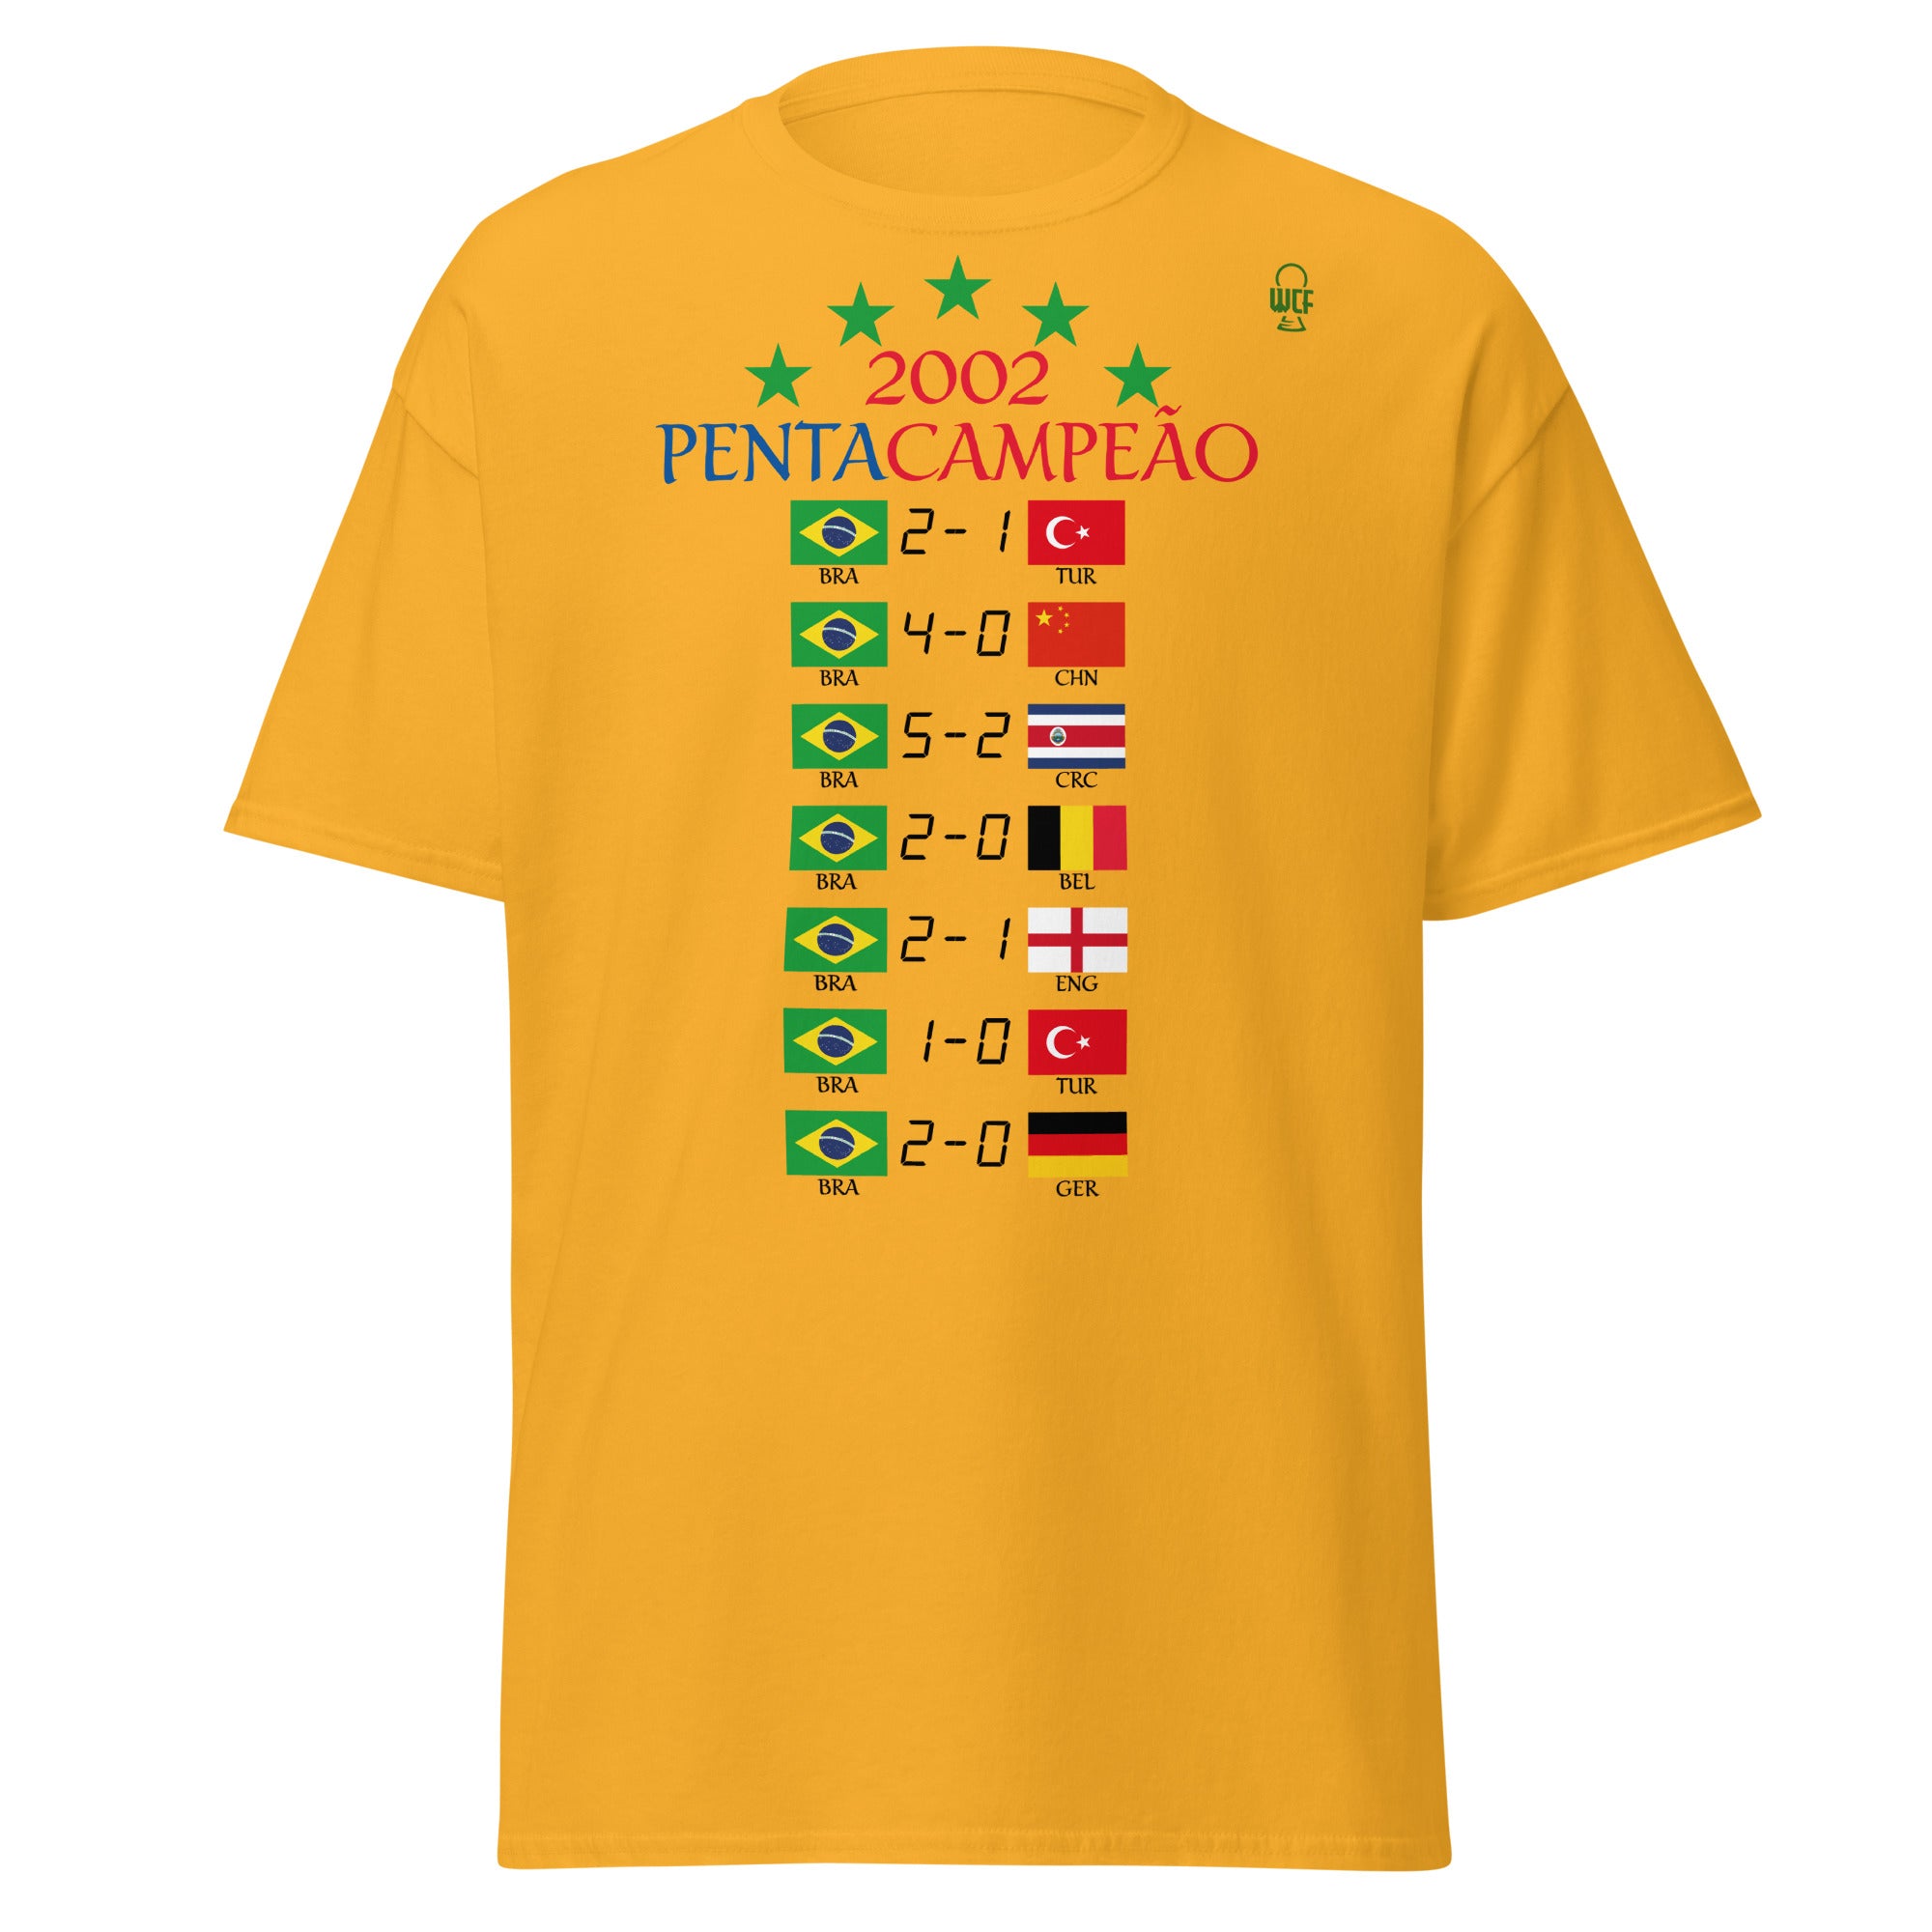 World Cup 2002 Classic T-Shirt - Road to the Glory - BRAZIL